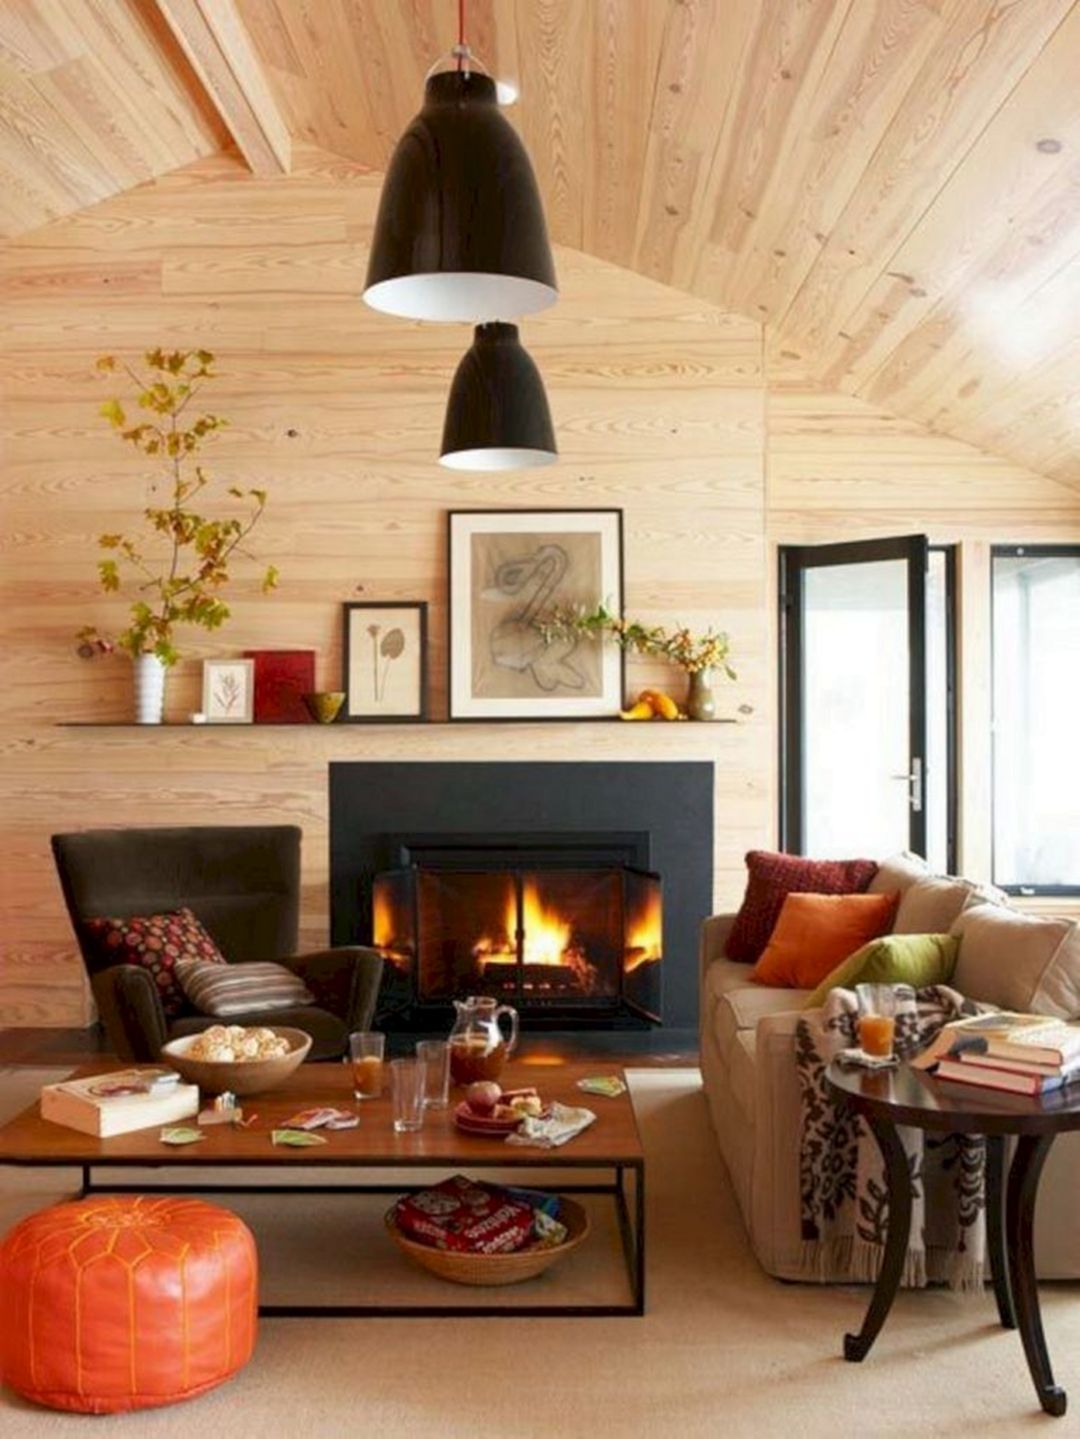 Cozy and inviting fall living room décor